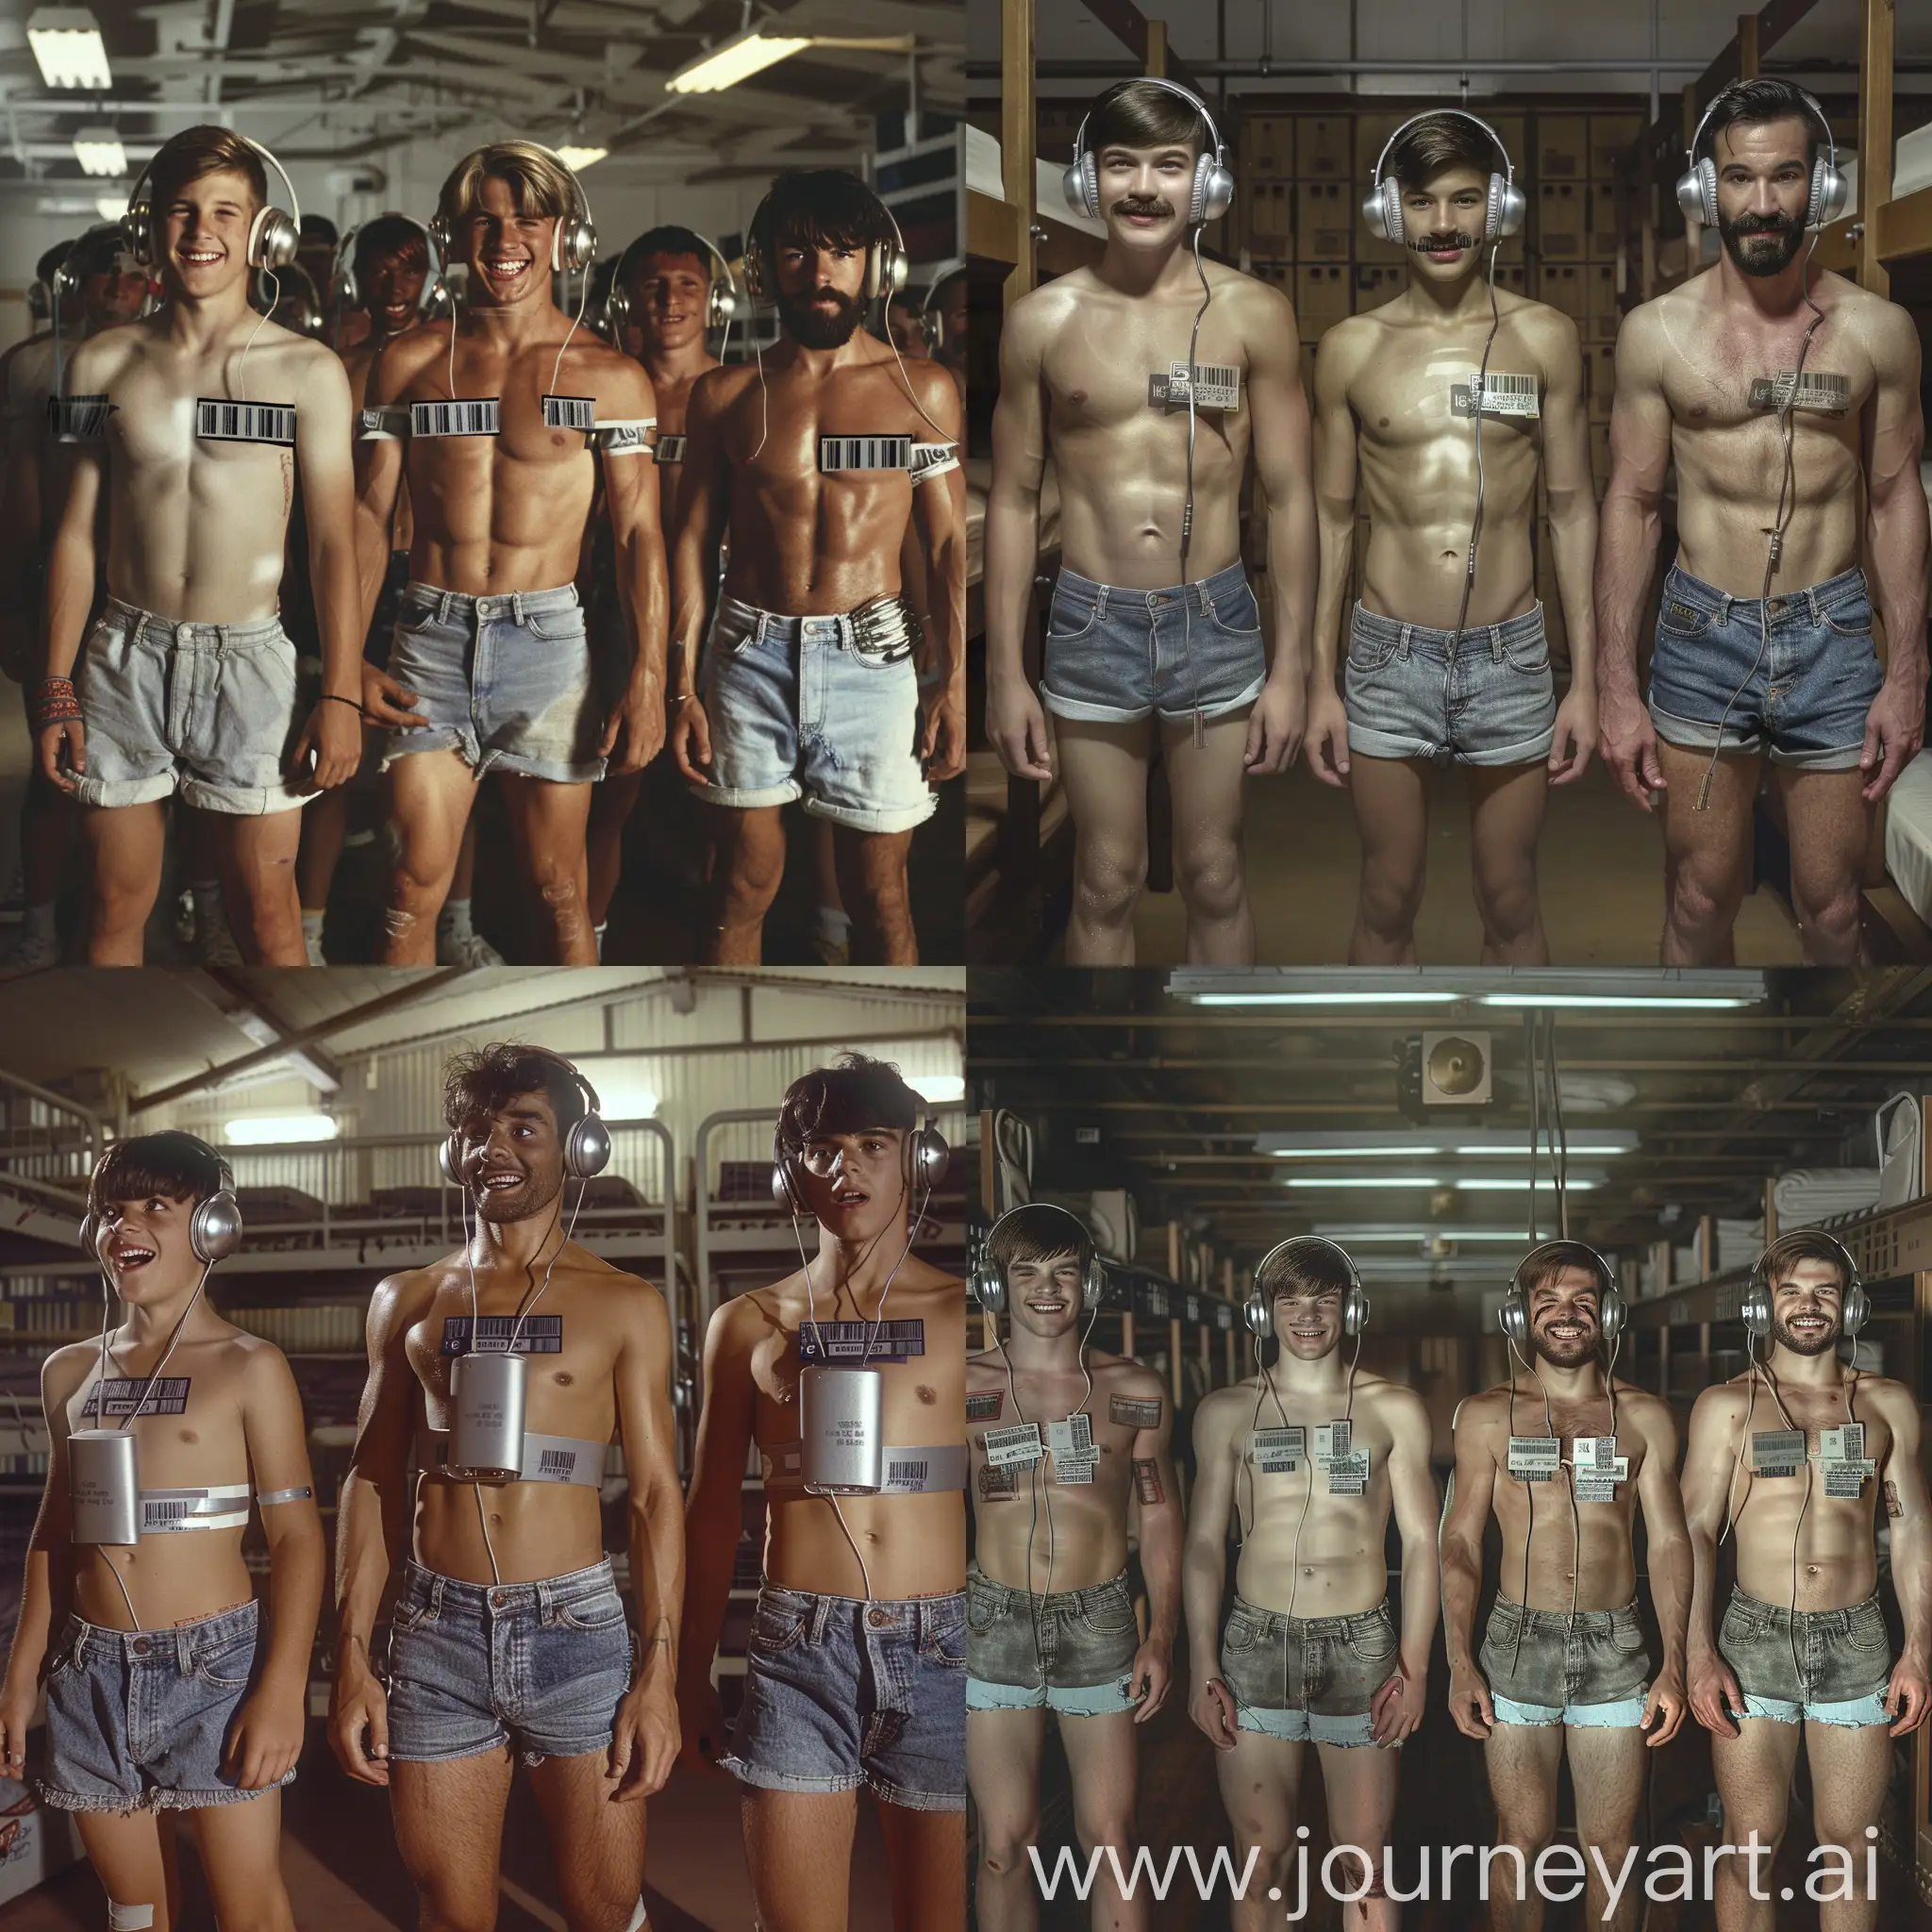 Handsome muscular teenage boys and handsome muscular middle-aged men each wear silver headphones and fitted cutoff denim shorts, dazed smiles, small barcode attached to each man's chest, 1980s army barracks with bunkbeds setting, facial hair, facing the viewer, mass indoctrination, color image, hyperrealistic, cinematic